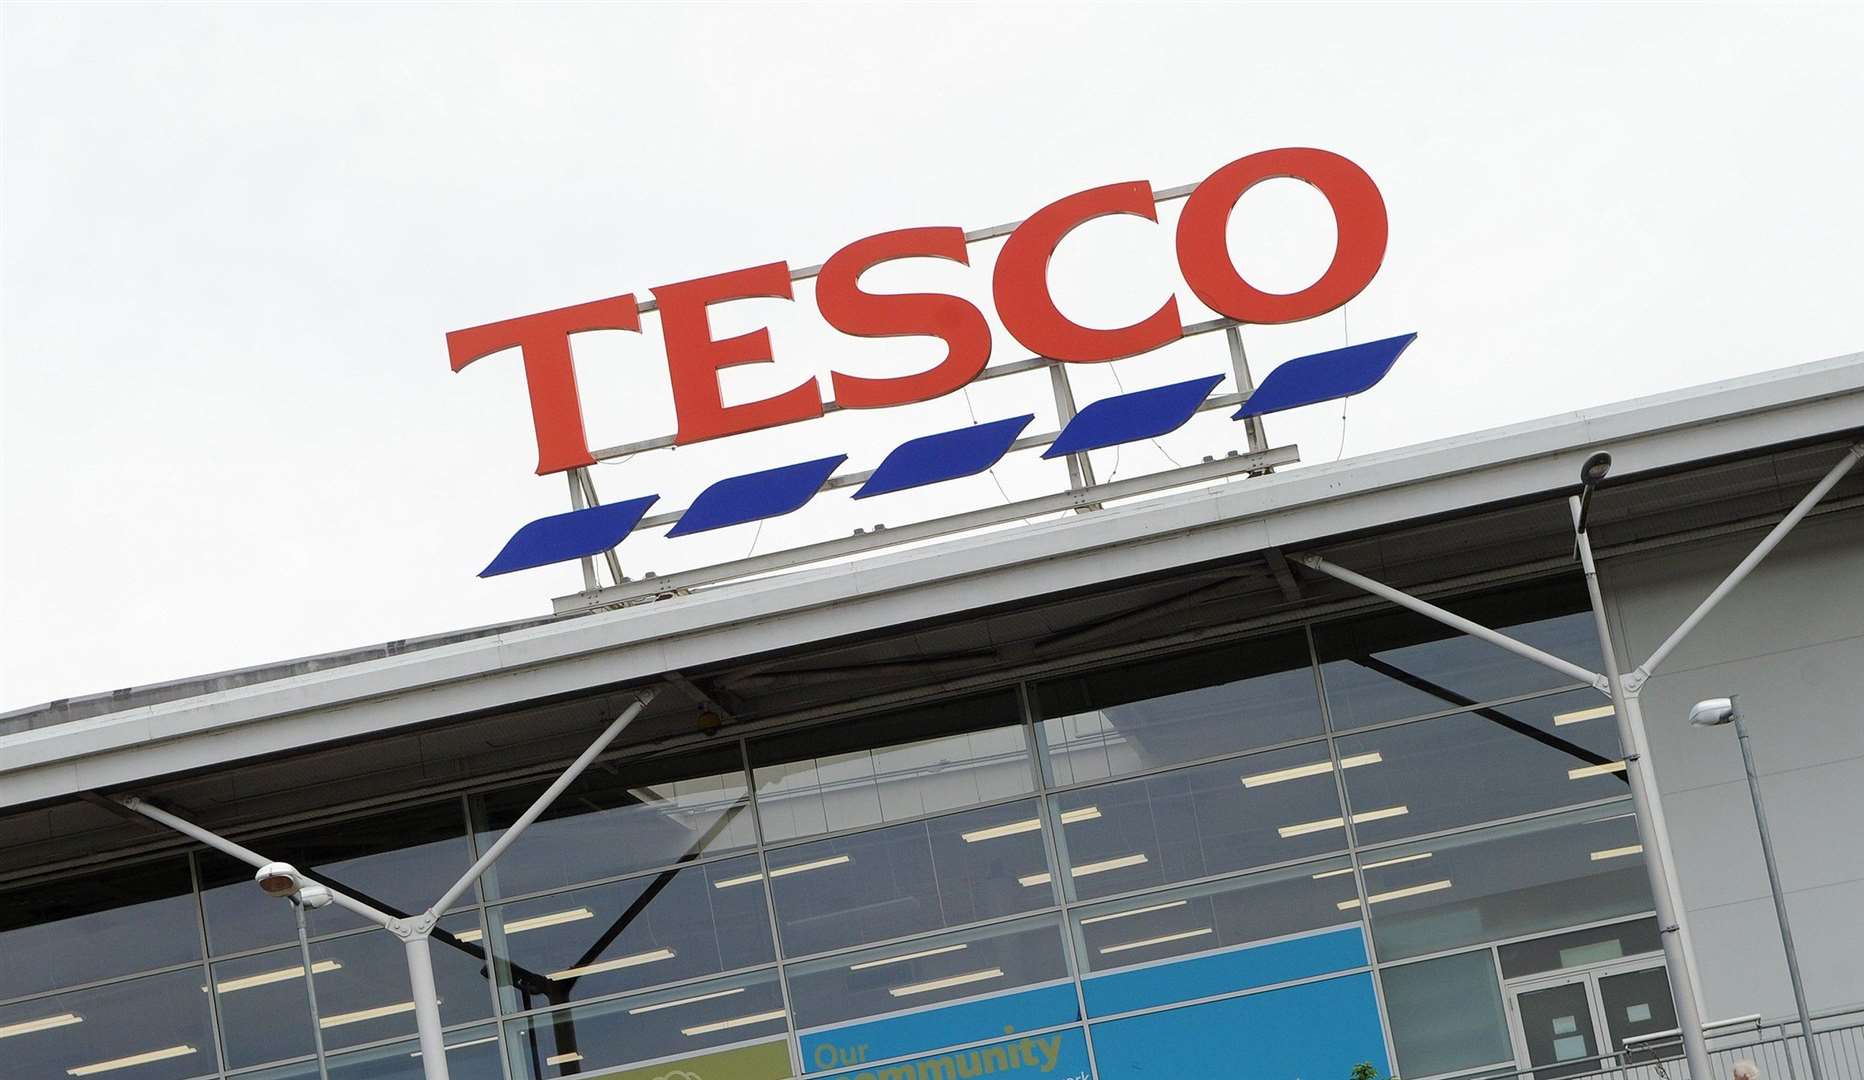 Parents are reporting shortages and empty shelves at supermarkets including Tesco